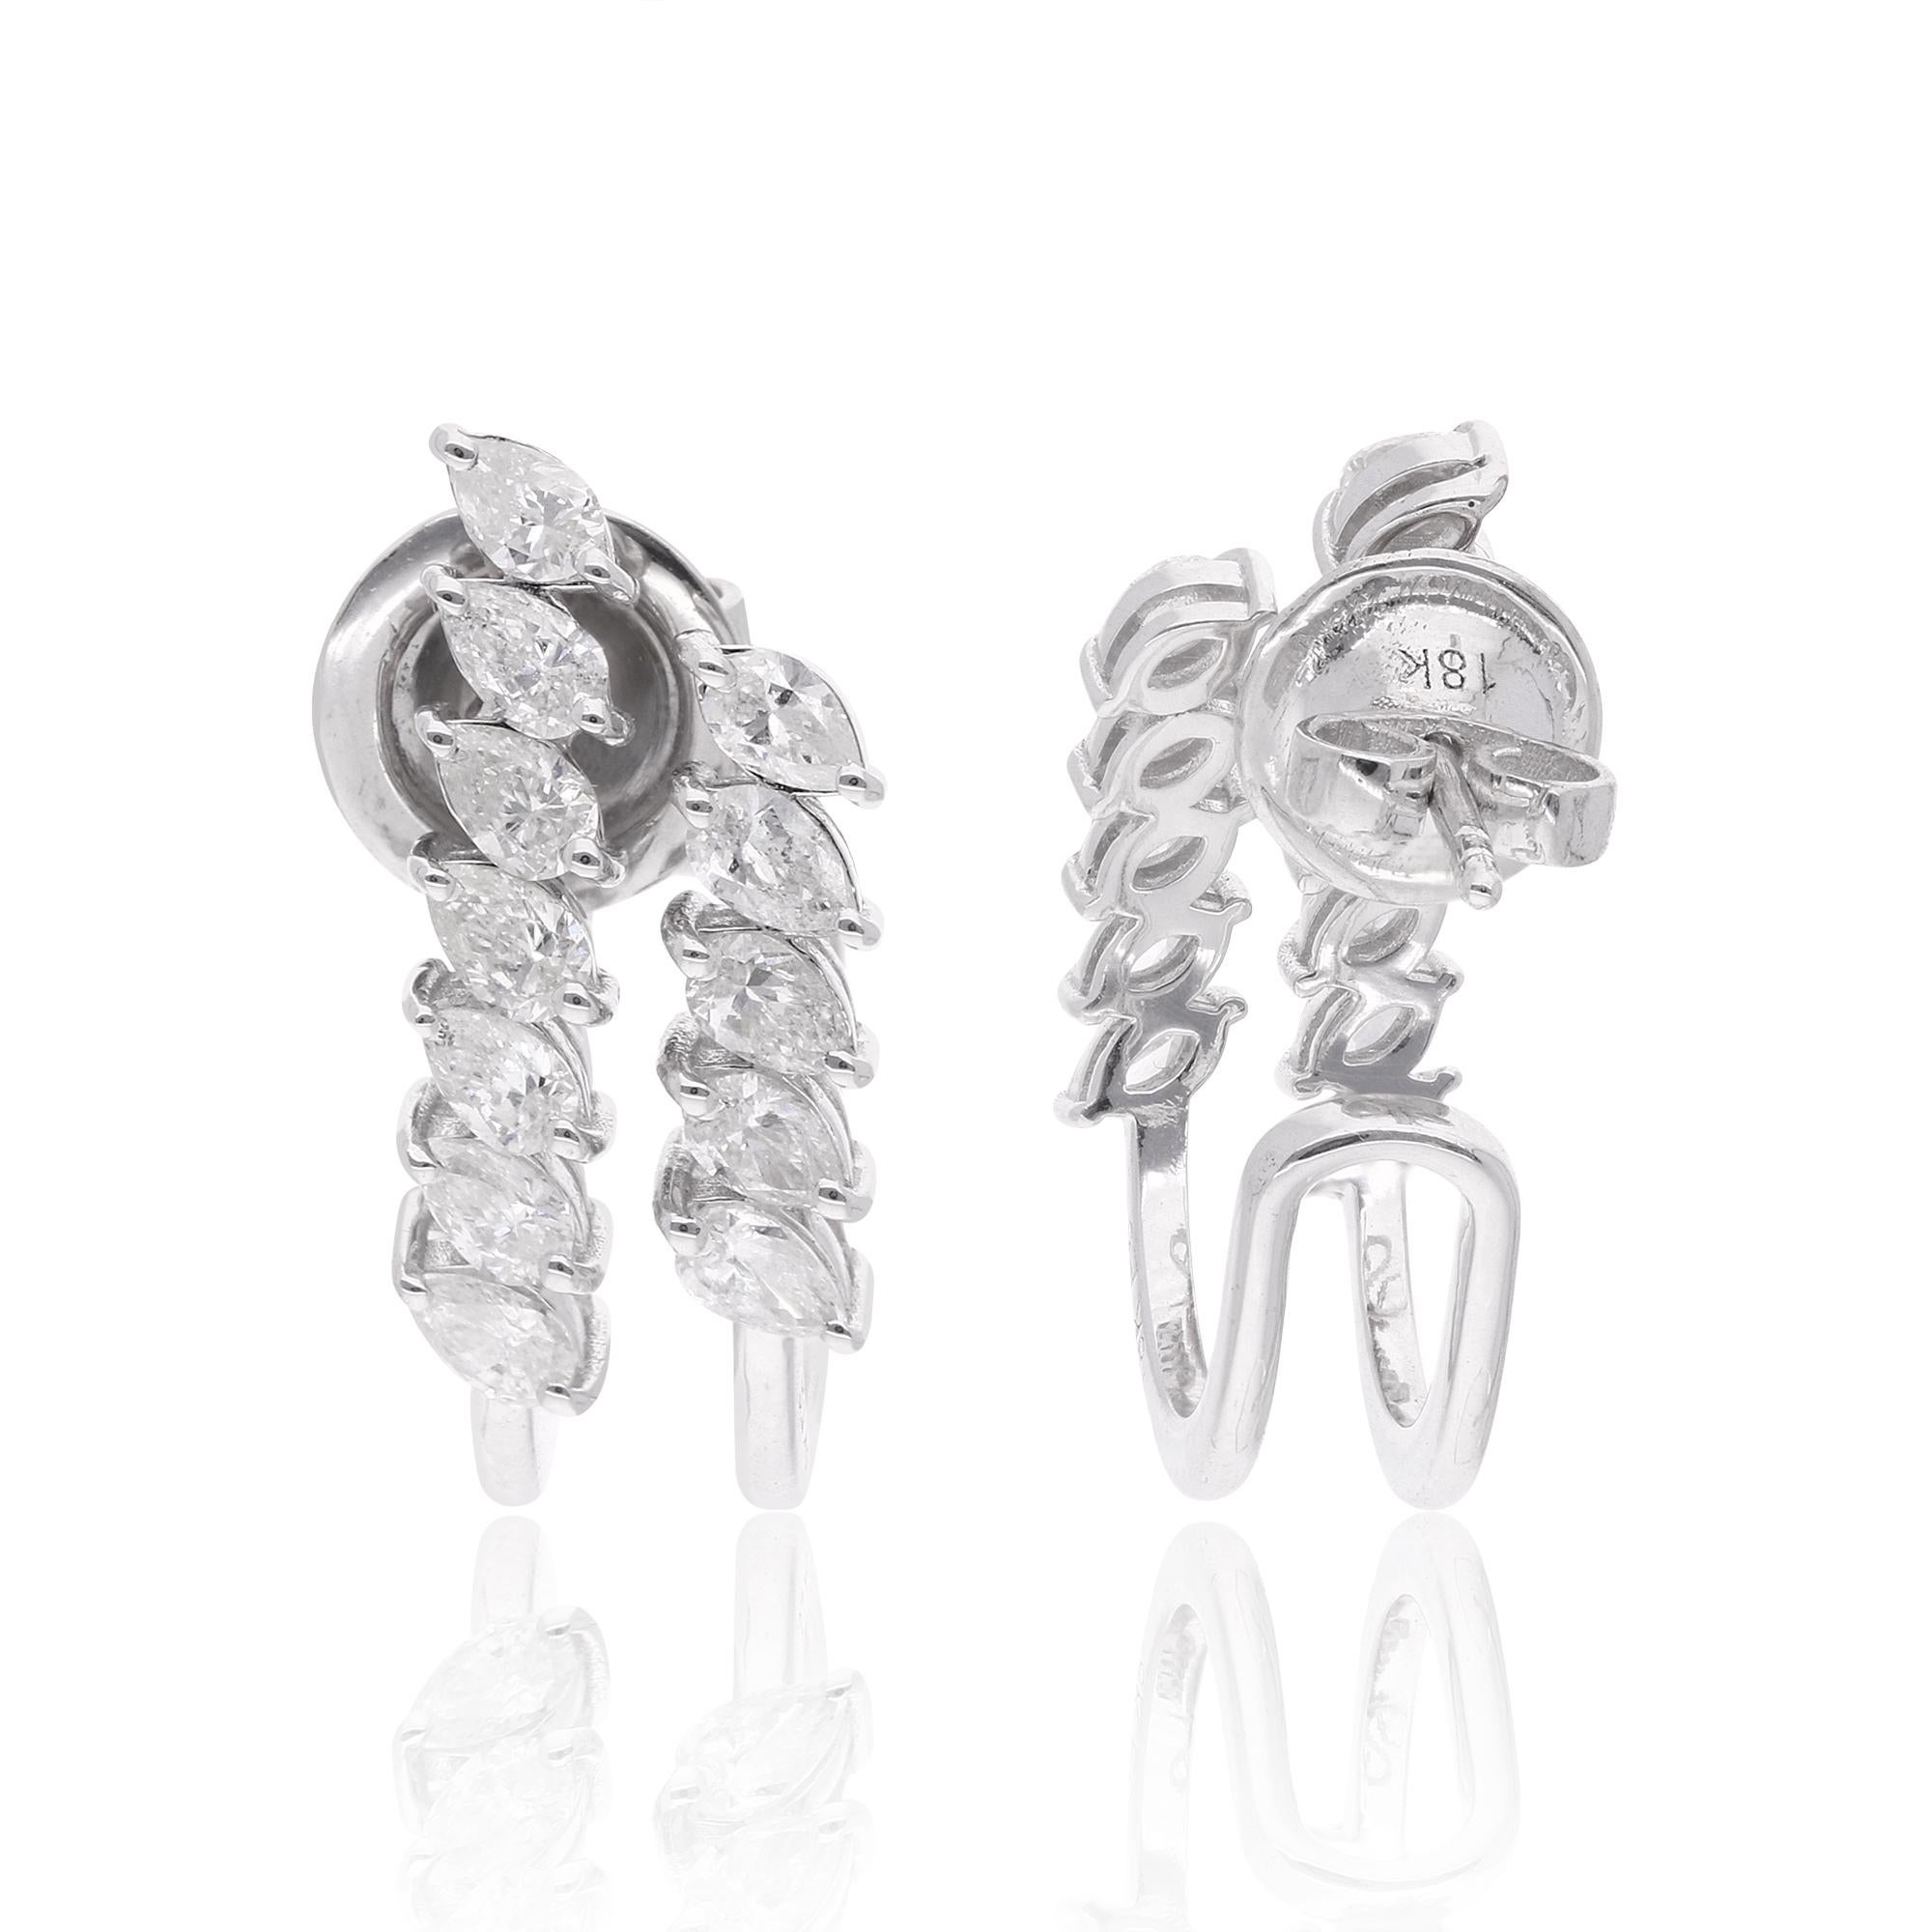 These earrings are meticulously handmade, showcasing the craftsmanship and artistry of the jewelry maker. The attention to detail is evident in the precise setting of the diamonds and the overall design of the earrings. The classic stud style